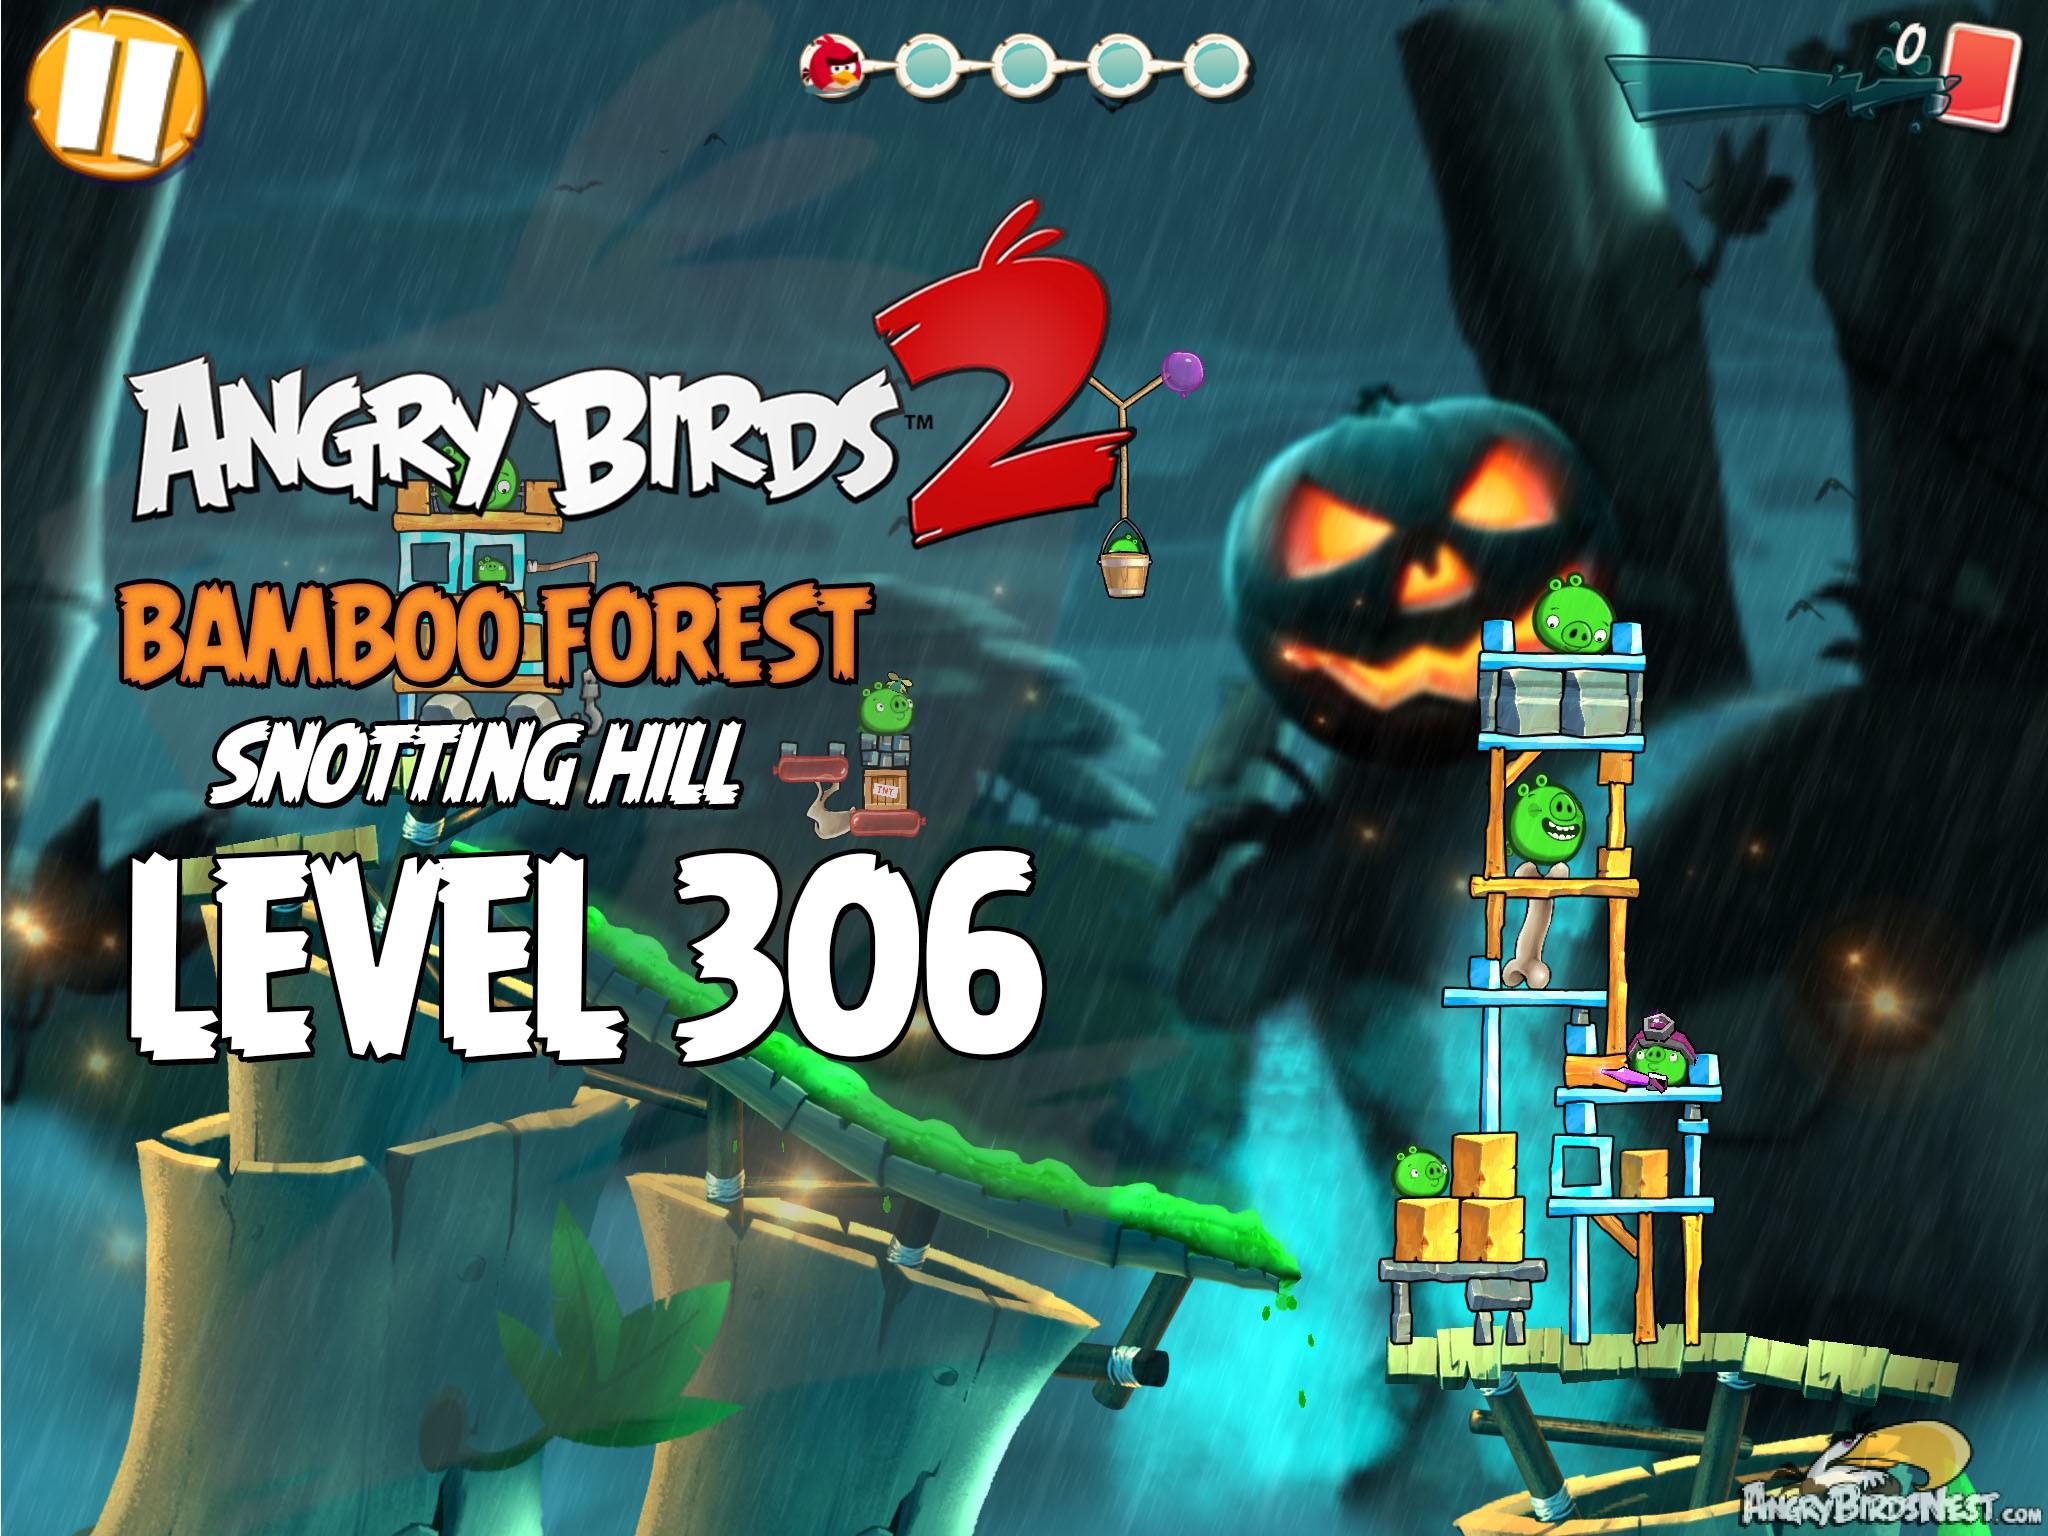 Angry Birds 2 Bamboo Forest Snotting Hill Level 306